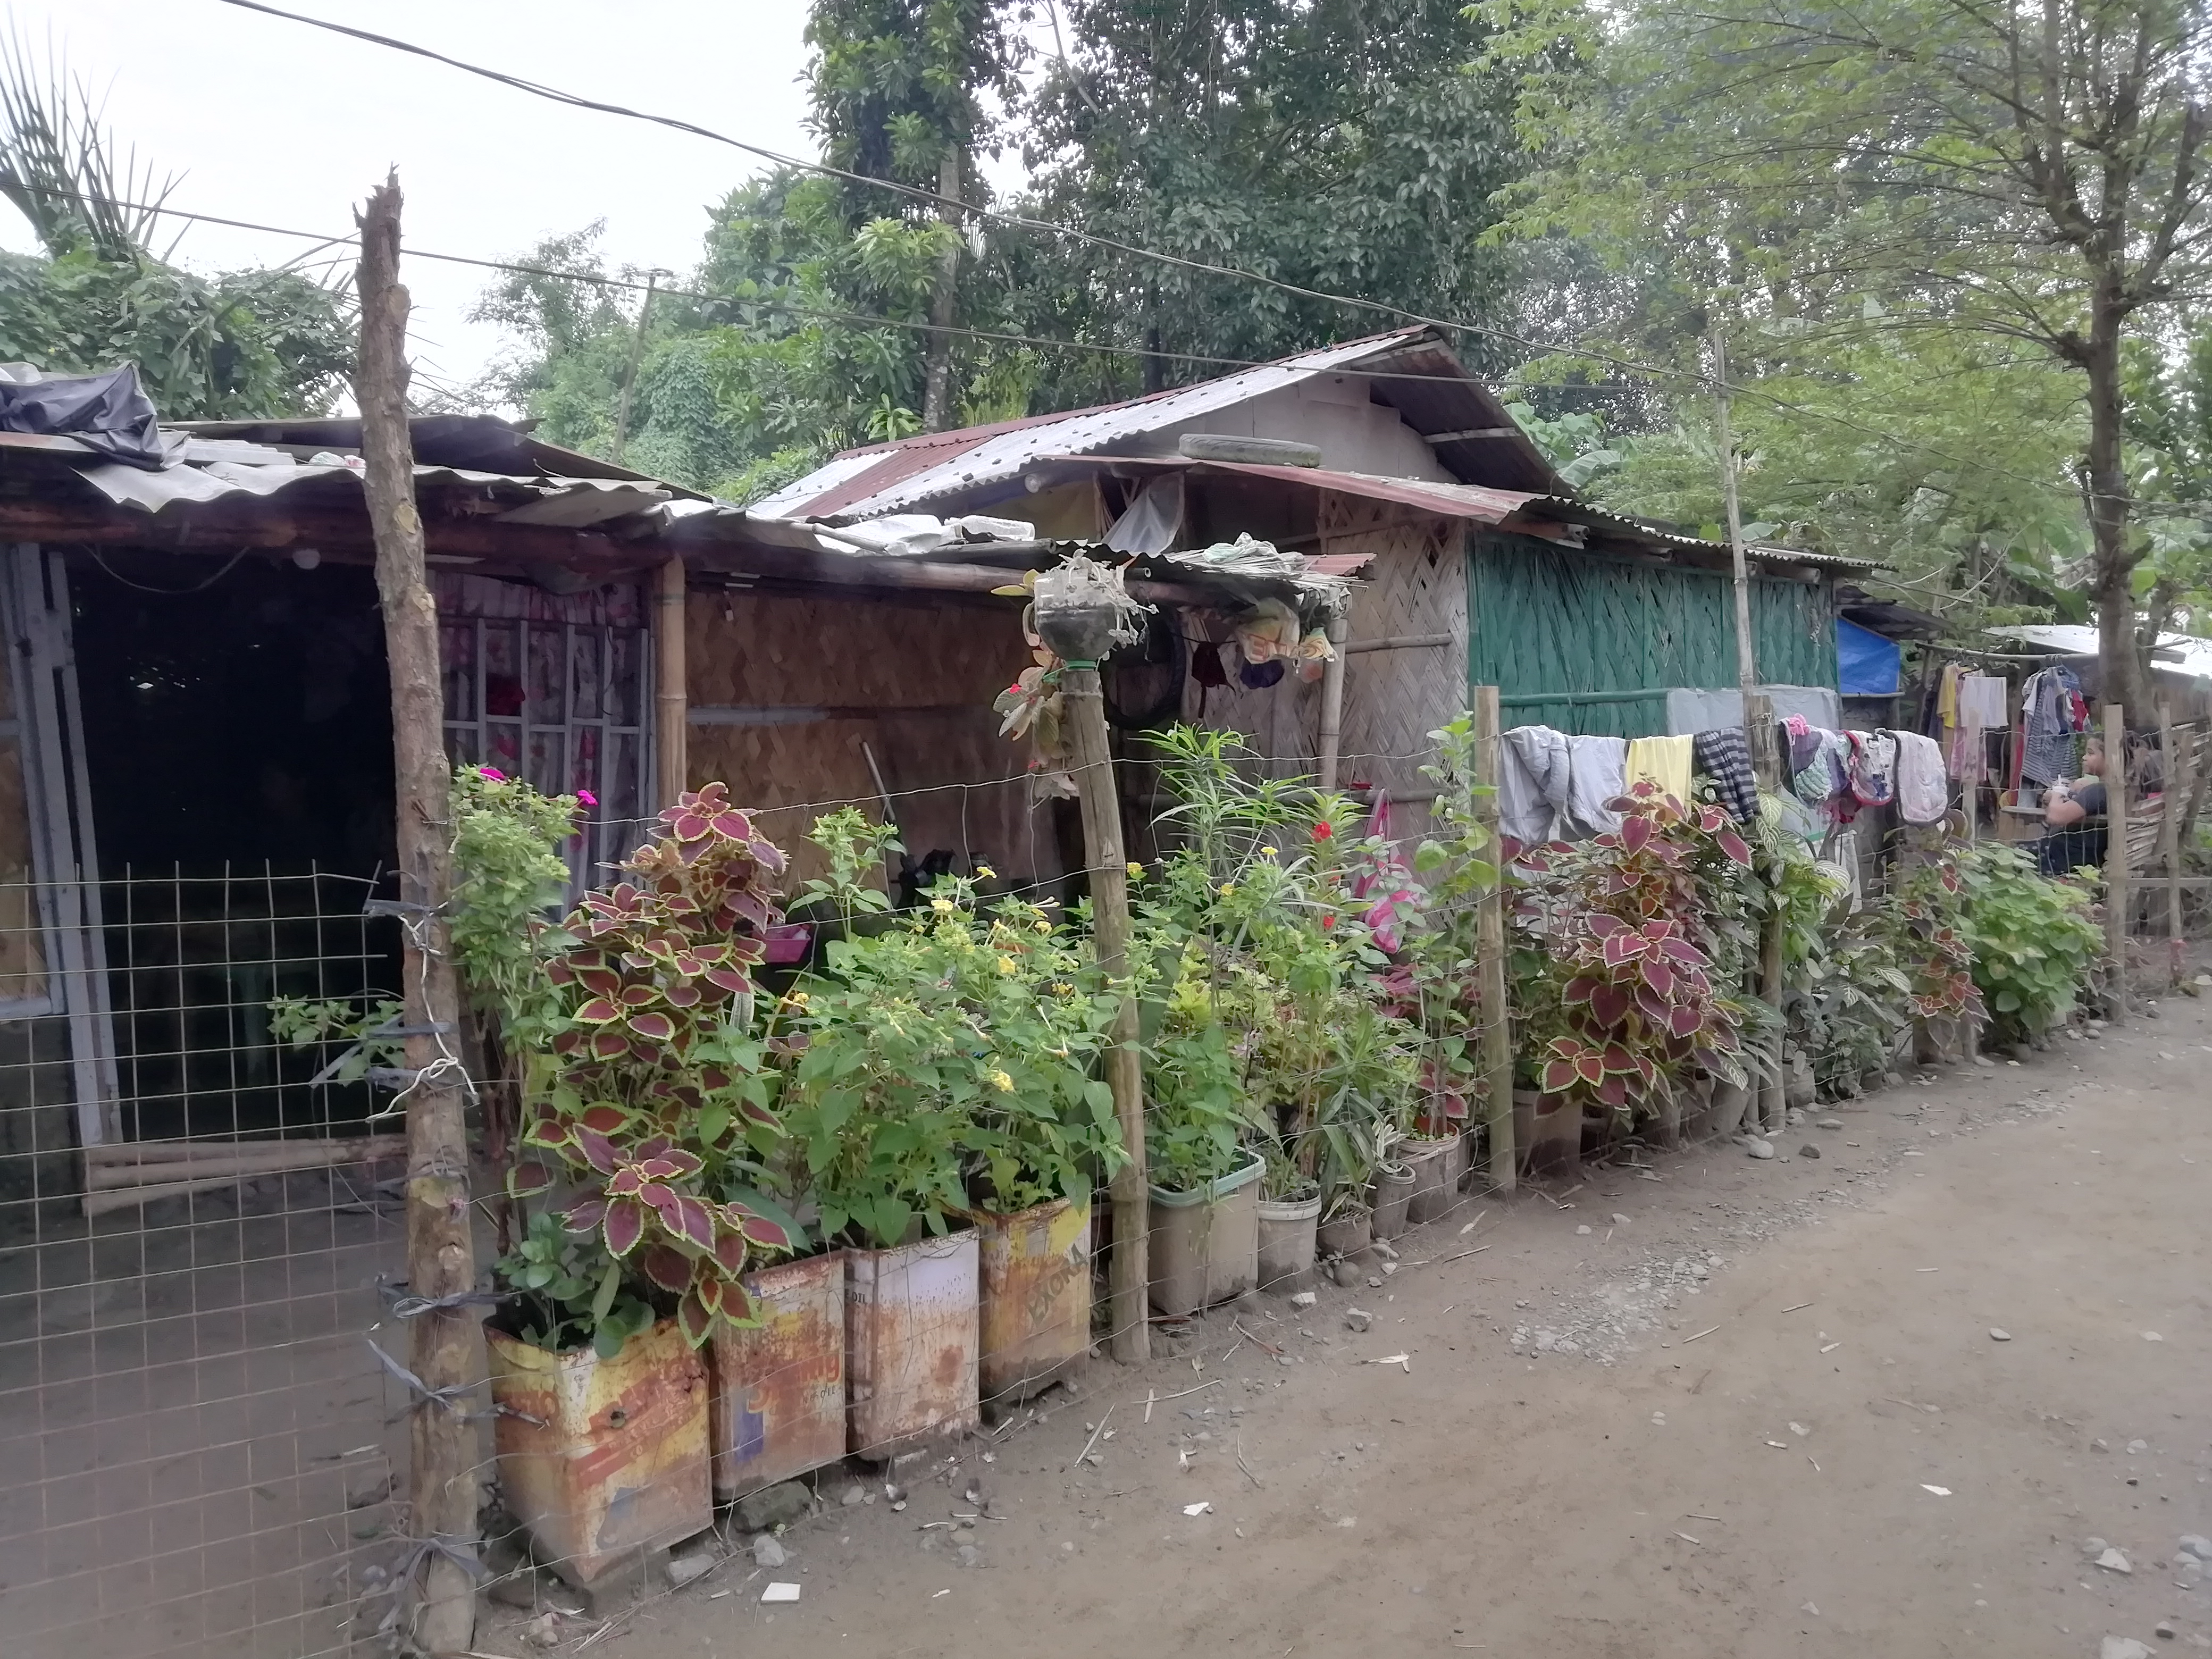 Good News! – A letter from the Philippines